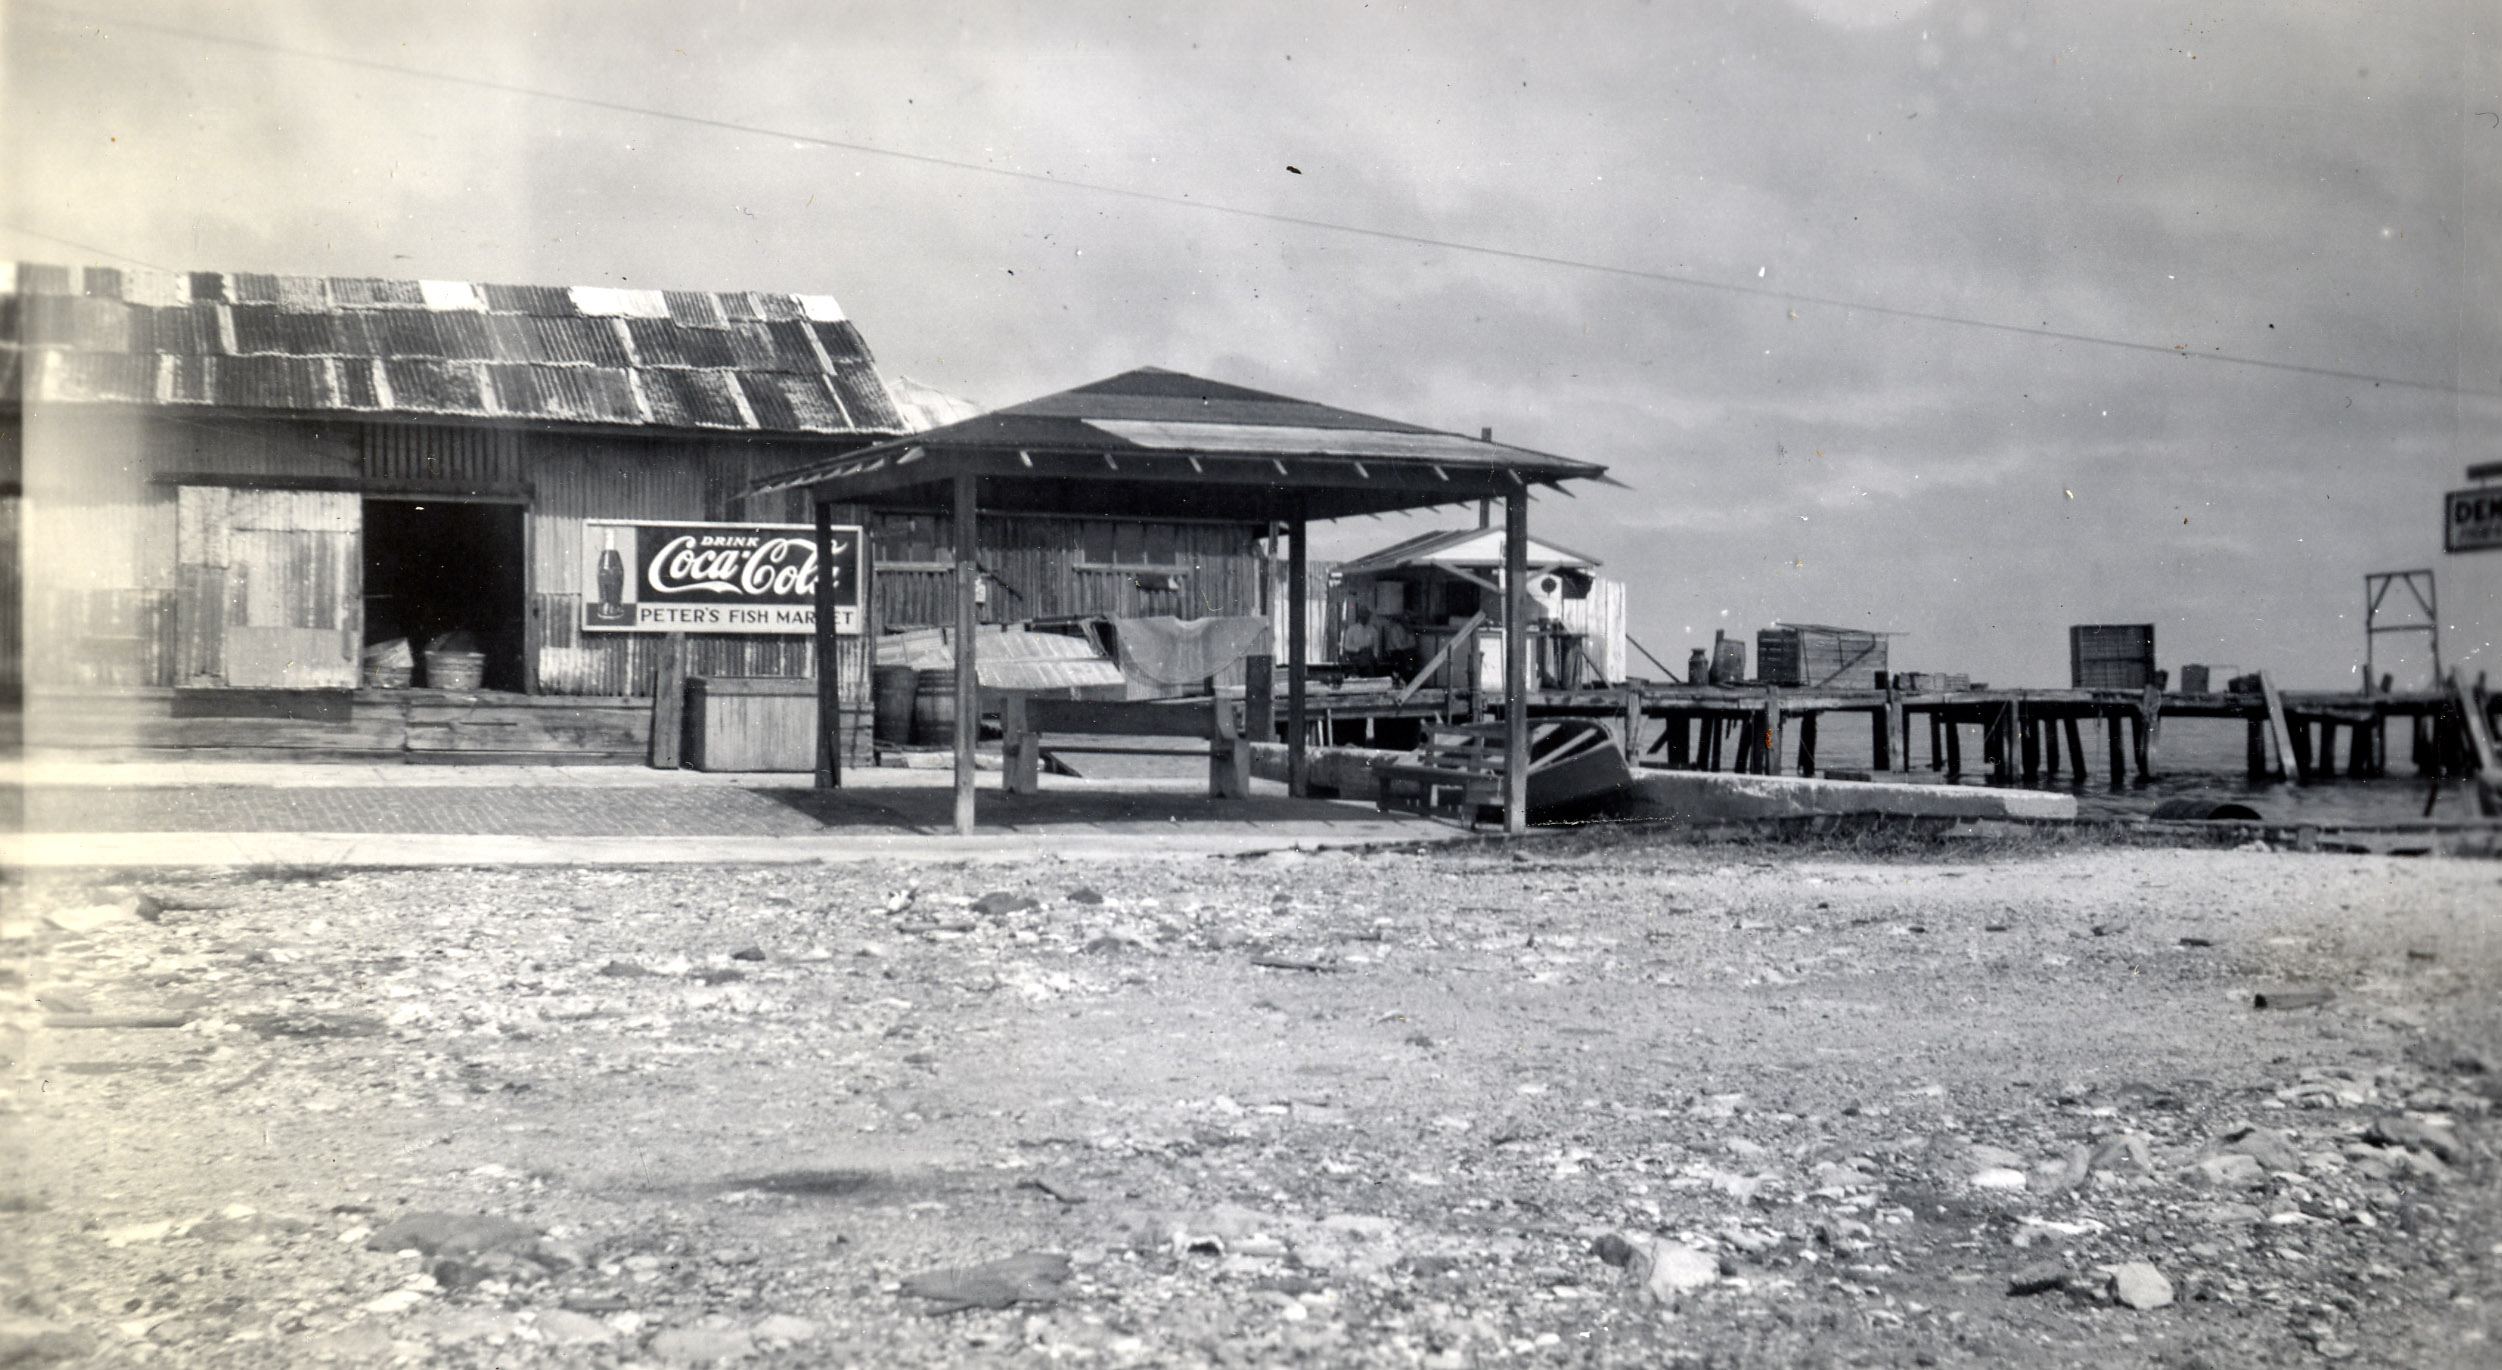 an old po of a gas station in the country